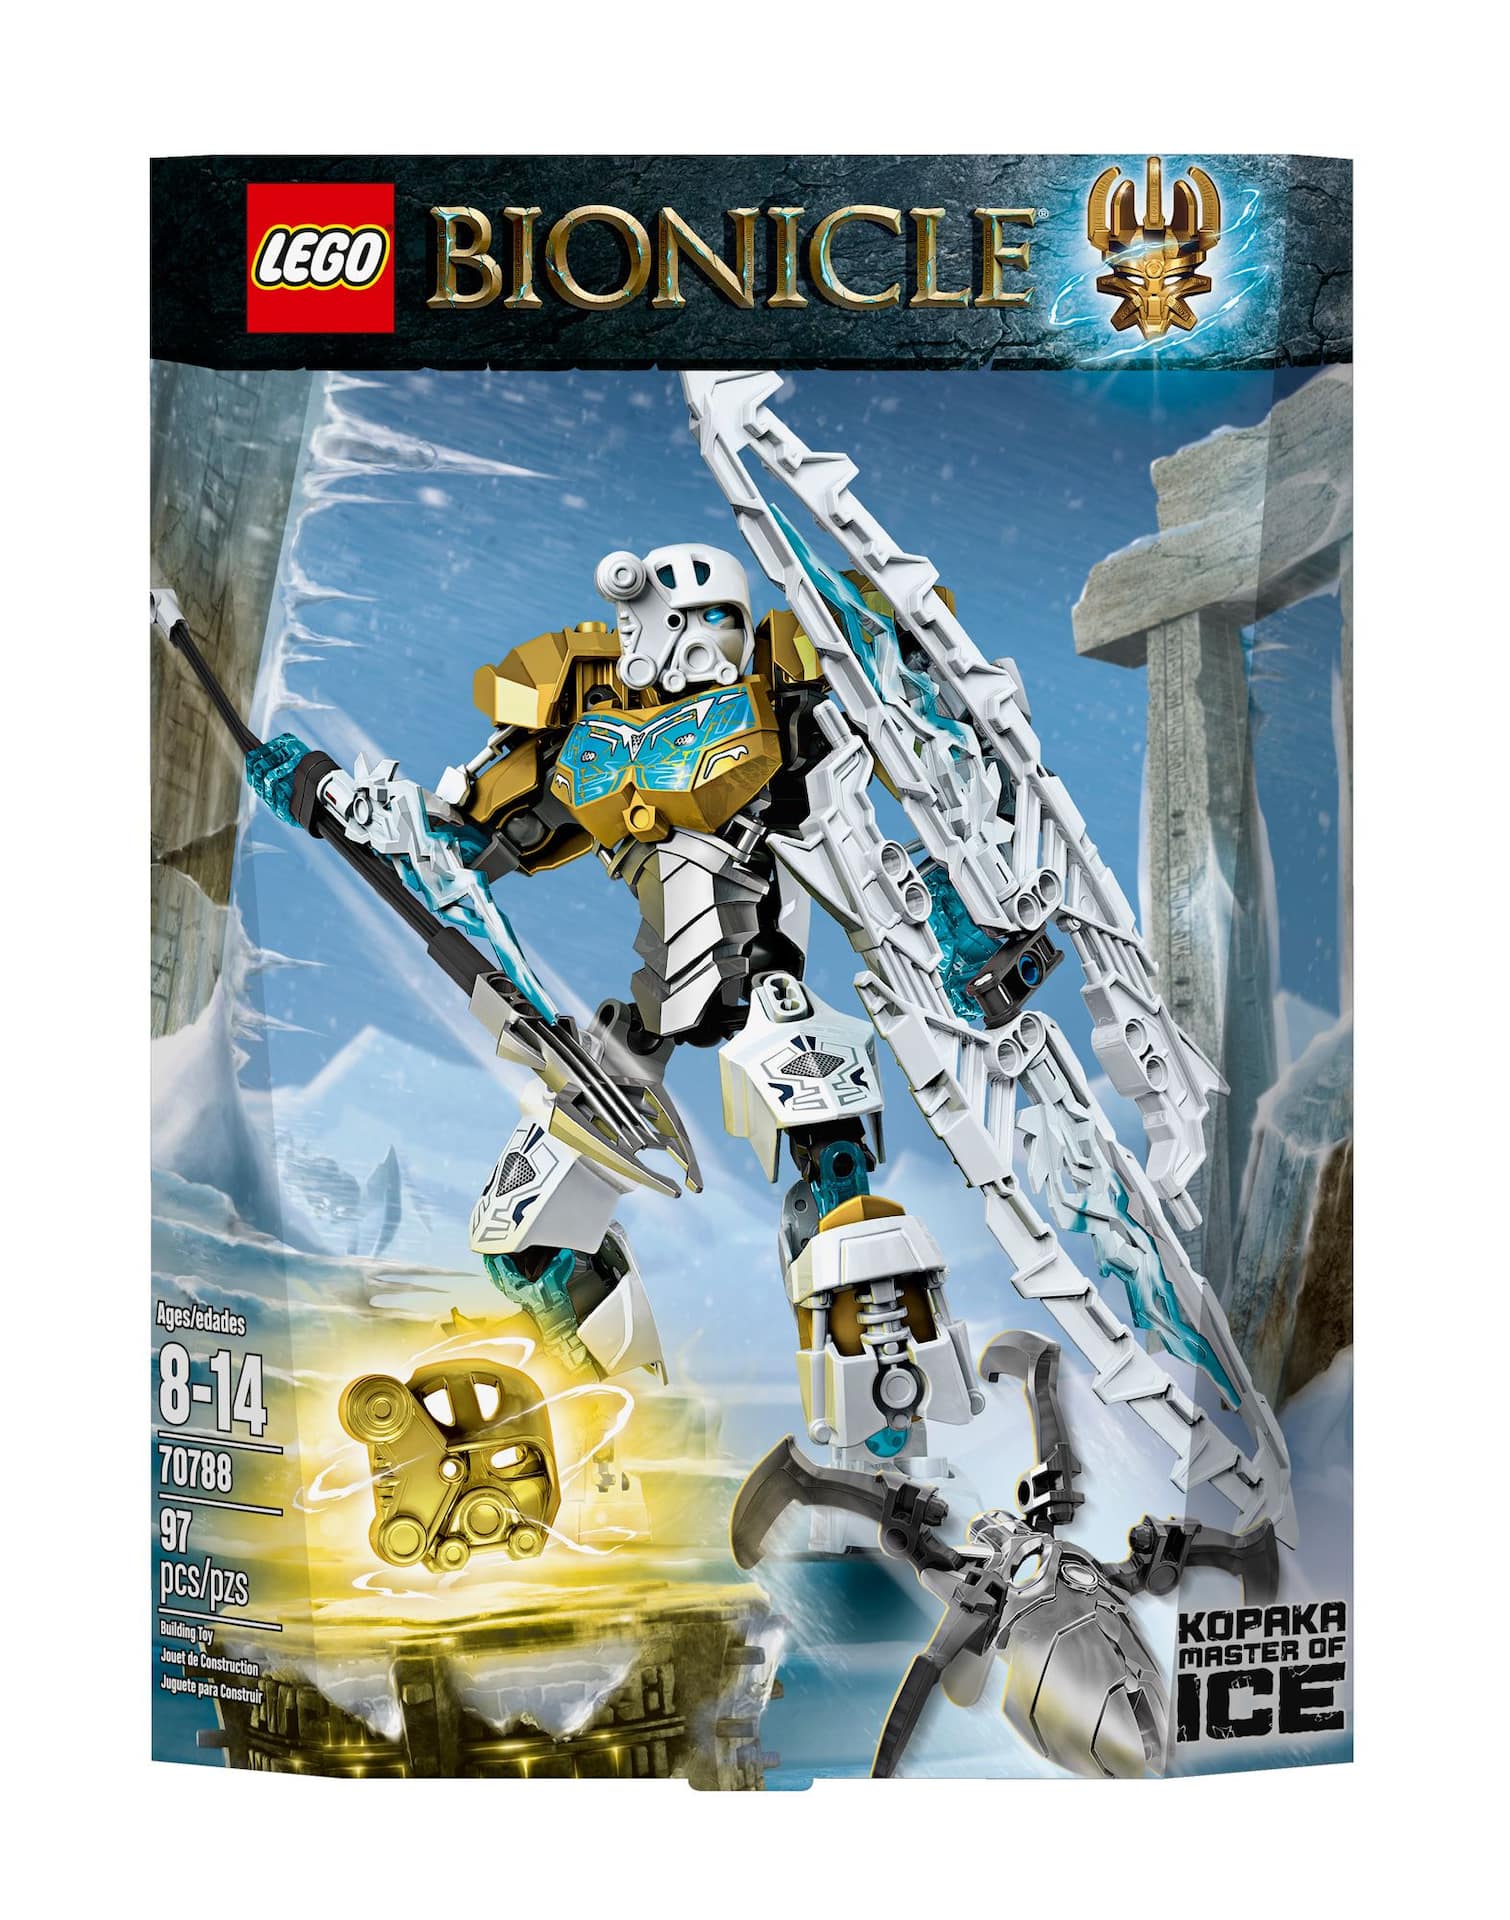 LEGO® Bionicle Gali Master of Water, 87-pcs | Canadian Tire